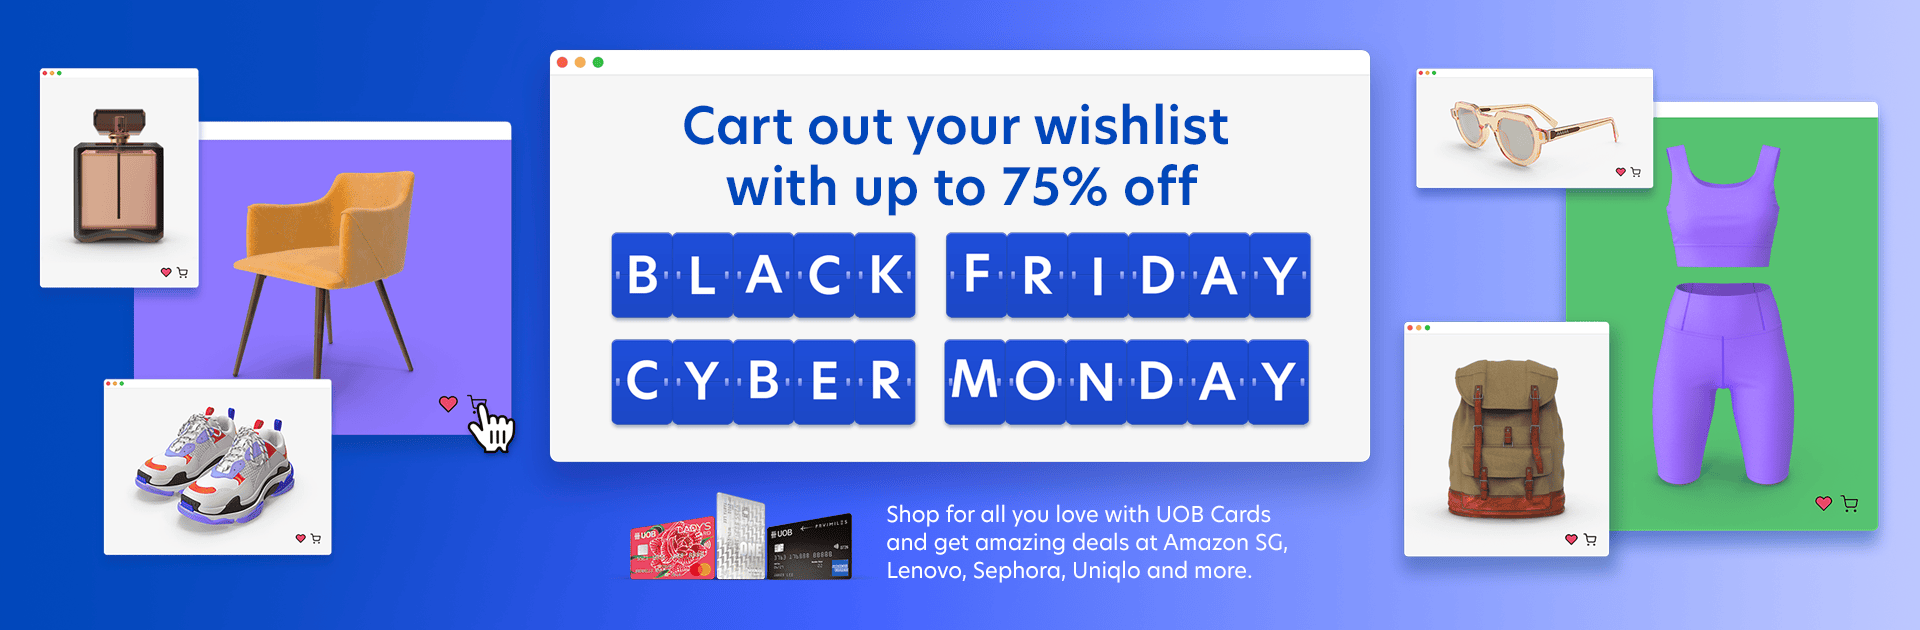 Cart out your wishlist with up to 75% off this Black Friday Cyber Monday